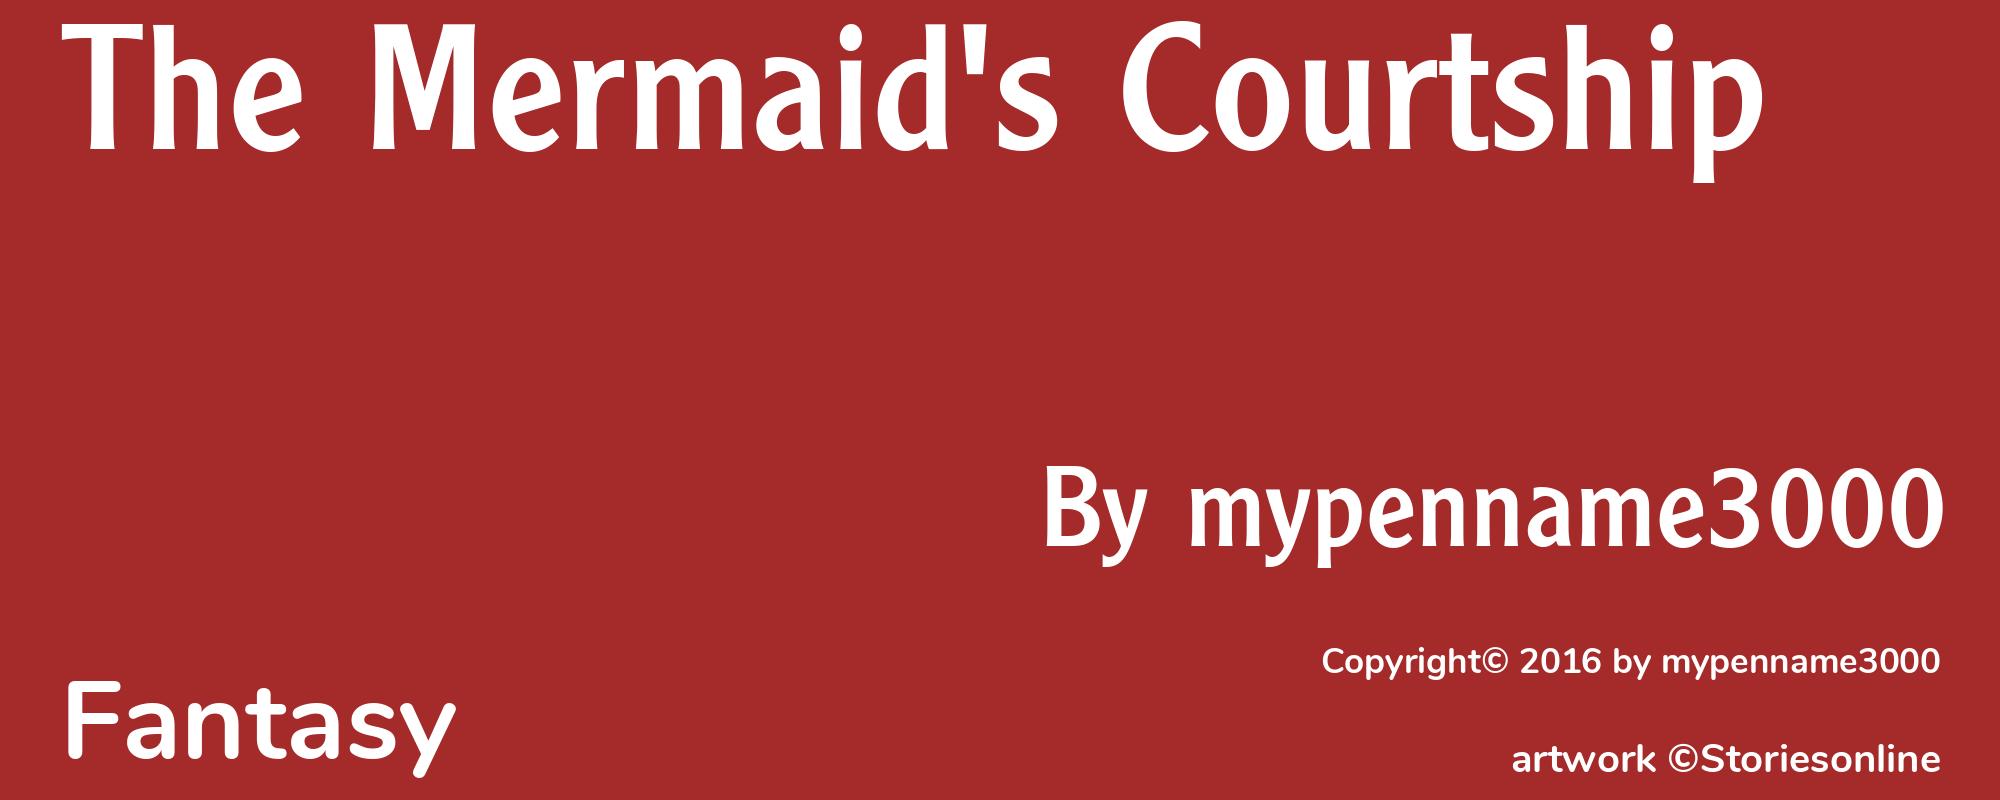 The Mermaid's Courtship - Cover